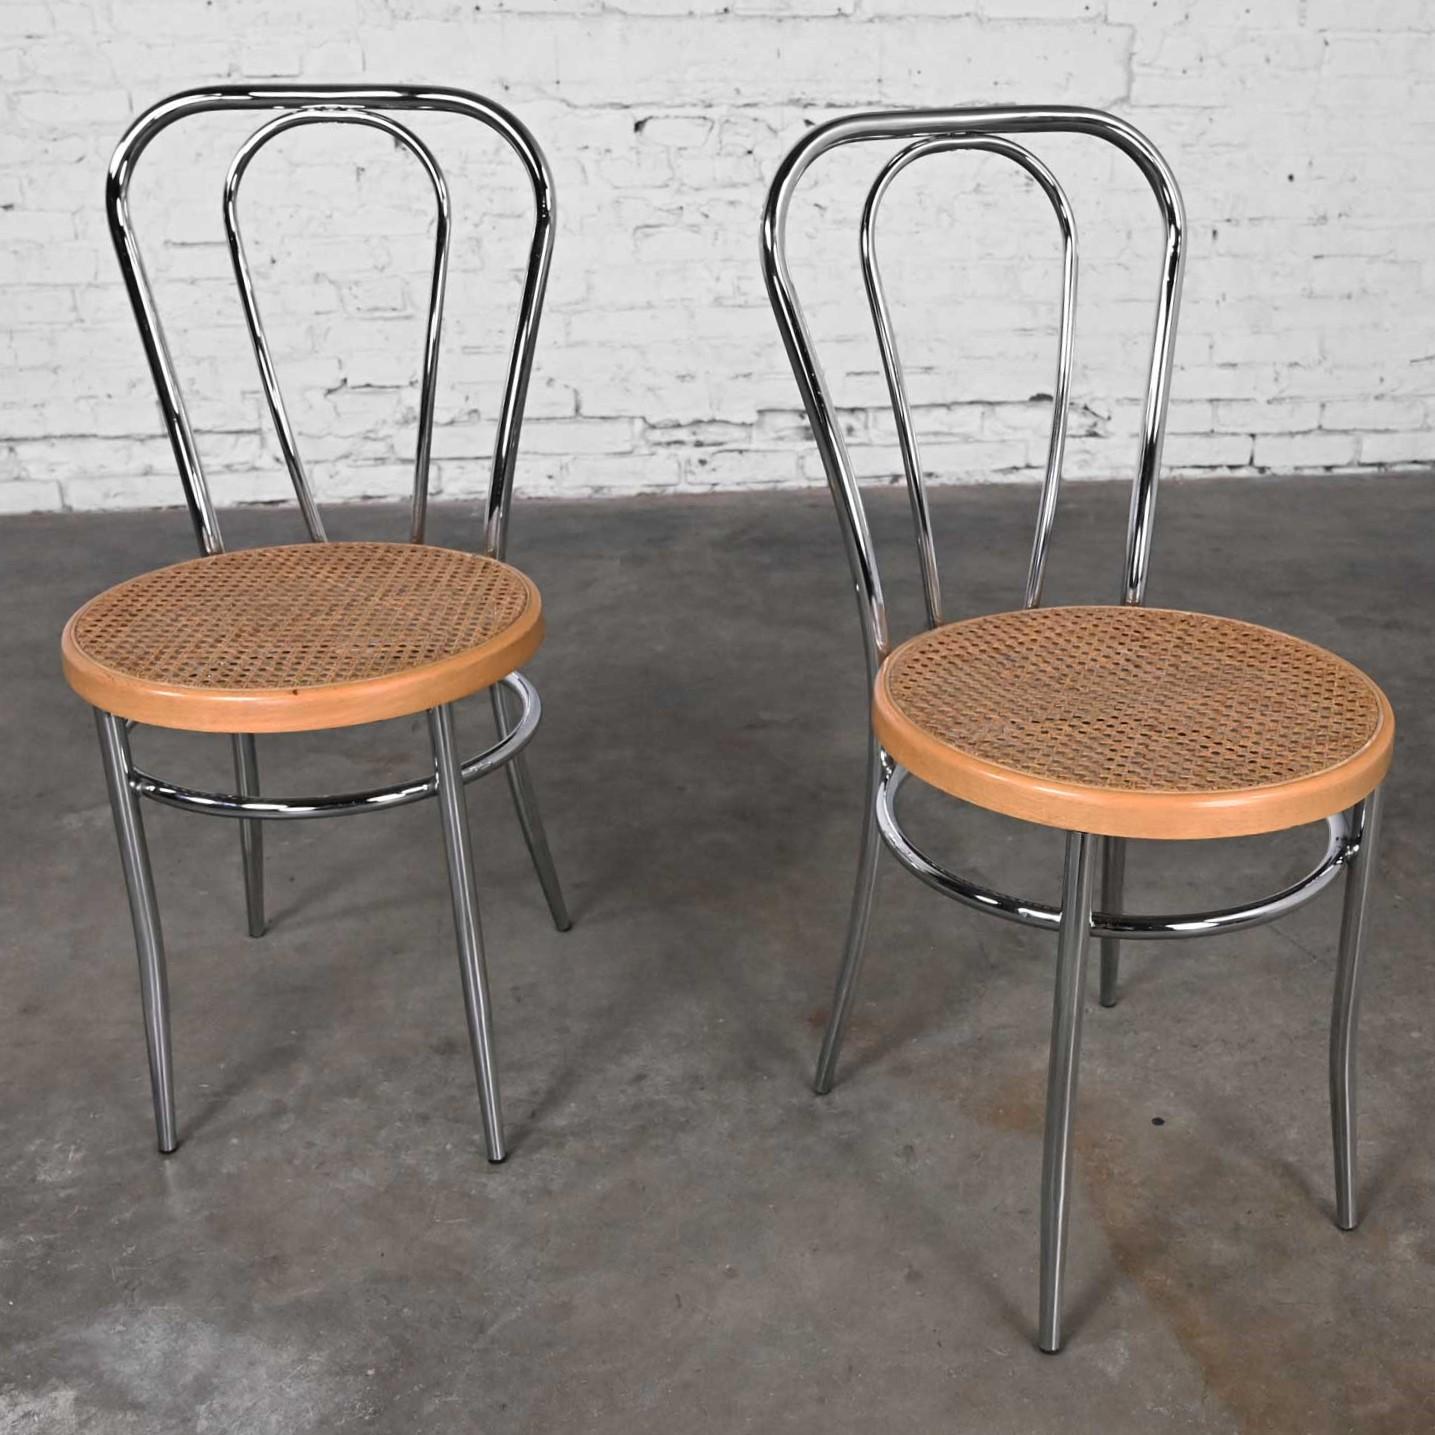 Pair Made Italy Bauhaus Style Bistro Café Chairs Chrome Cane Seat After Thonet For Sale 9